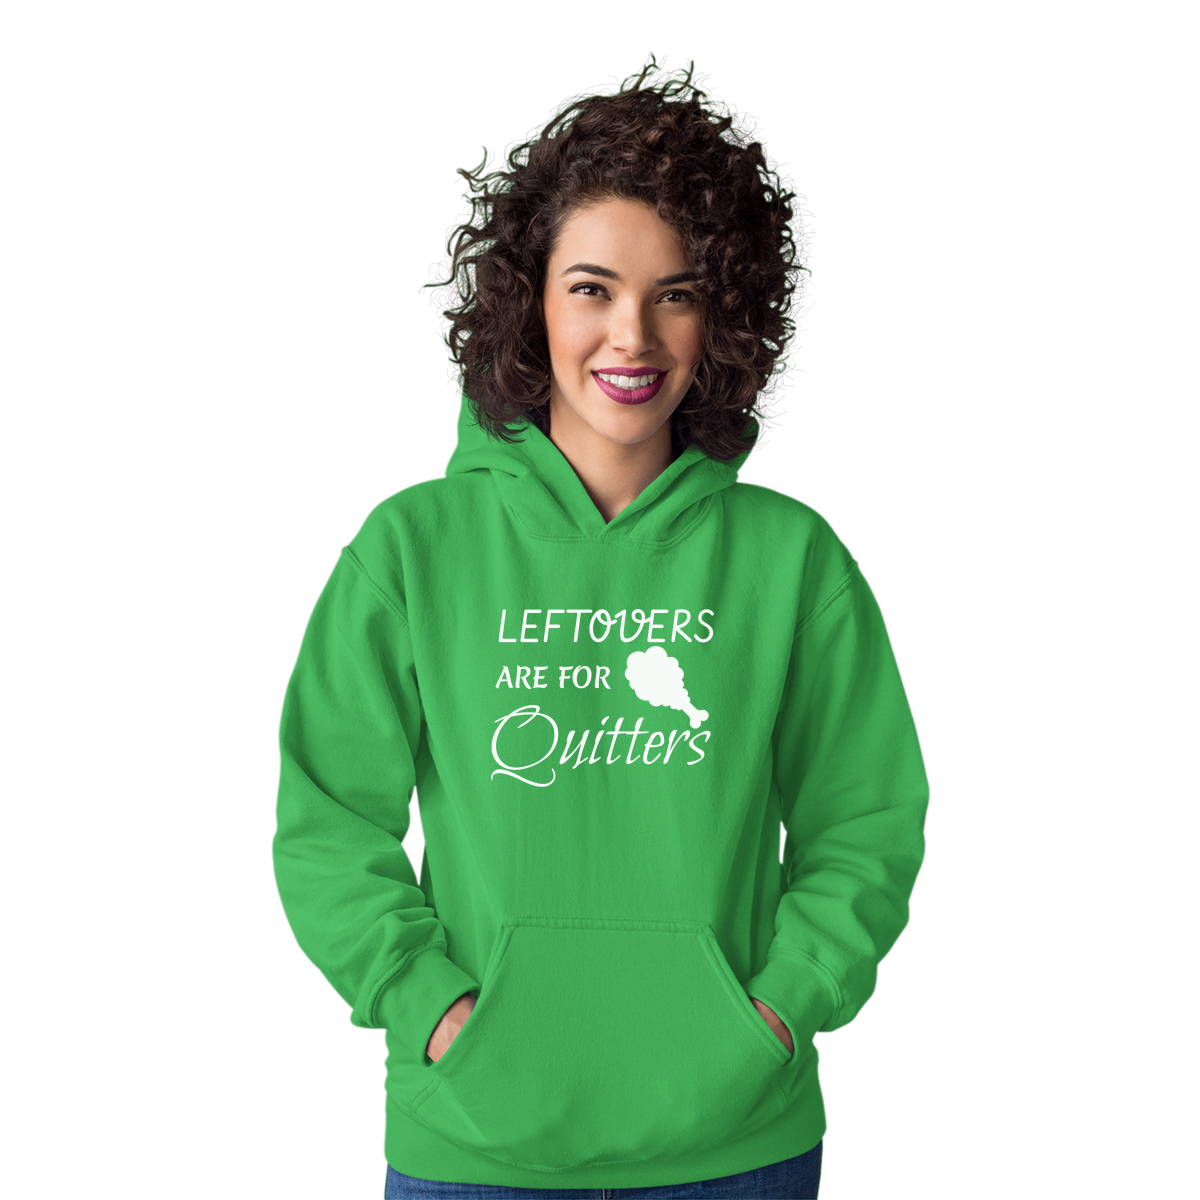 Leftovers Are For Quitters Unisex Hoodie | Green